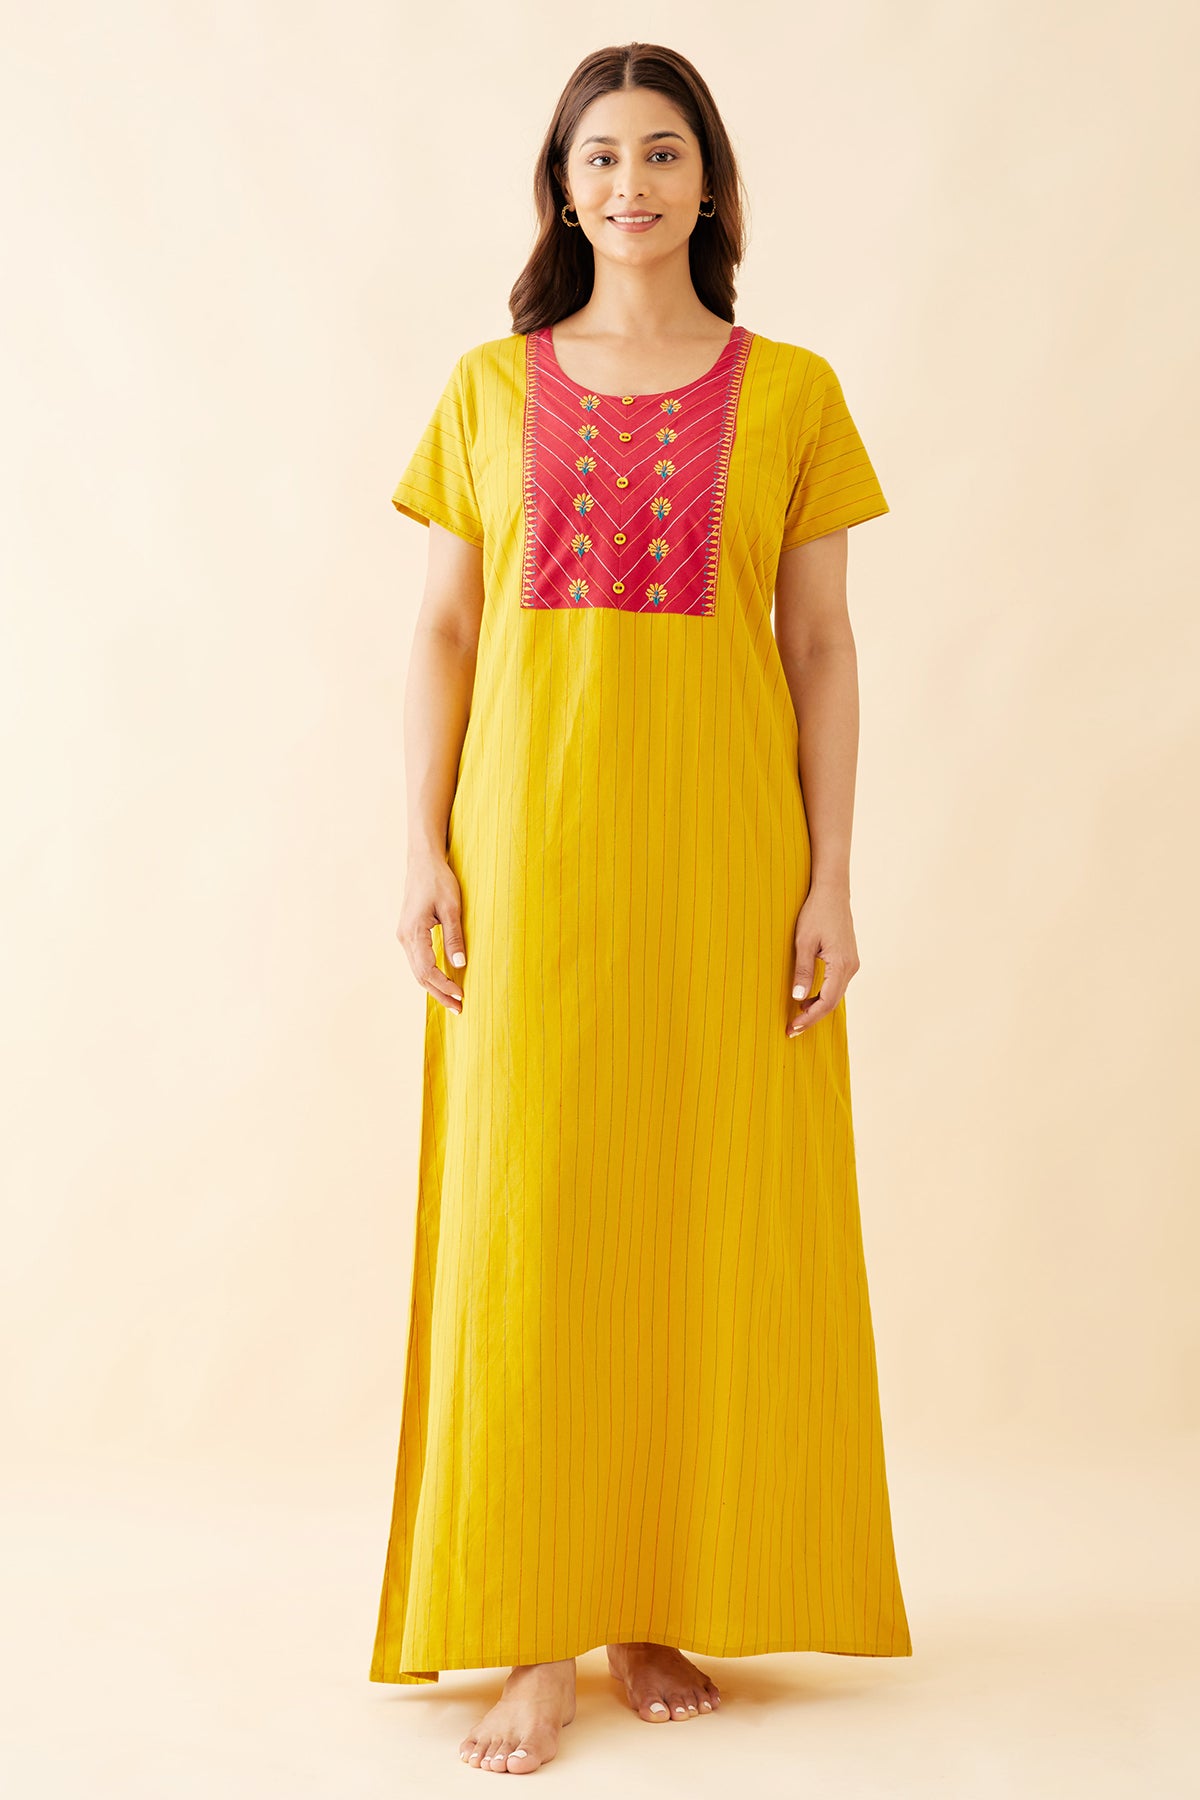 Allover Striped With Floral Embroidered Nighty - Yellow